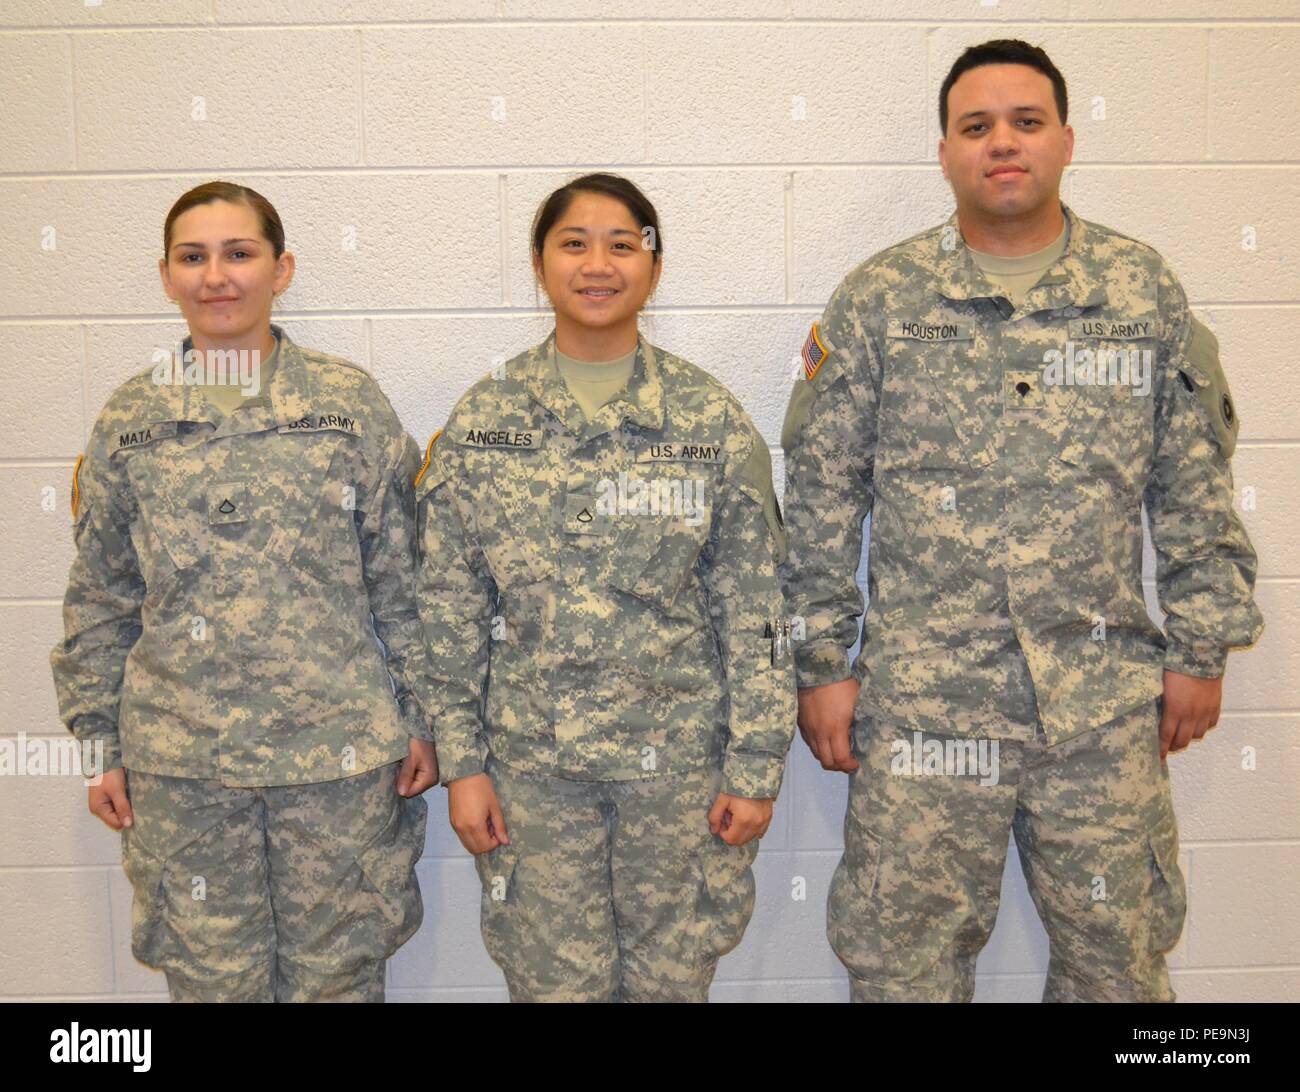 Pfc. Genephere Mata, Pfc. Kassandra Angeles and Spc. Marcos Houston, members of the 650th Regional Support Group, participated in a Joint Culinary Training Program exercise at the George W. Dunaway Army Reserve Center in Sloan, Nev., Nov. 15, where they trained and learned extra culinary skills at this event. Stock Photo